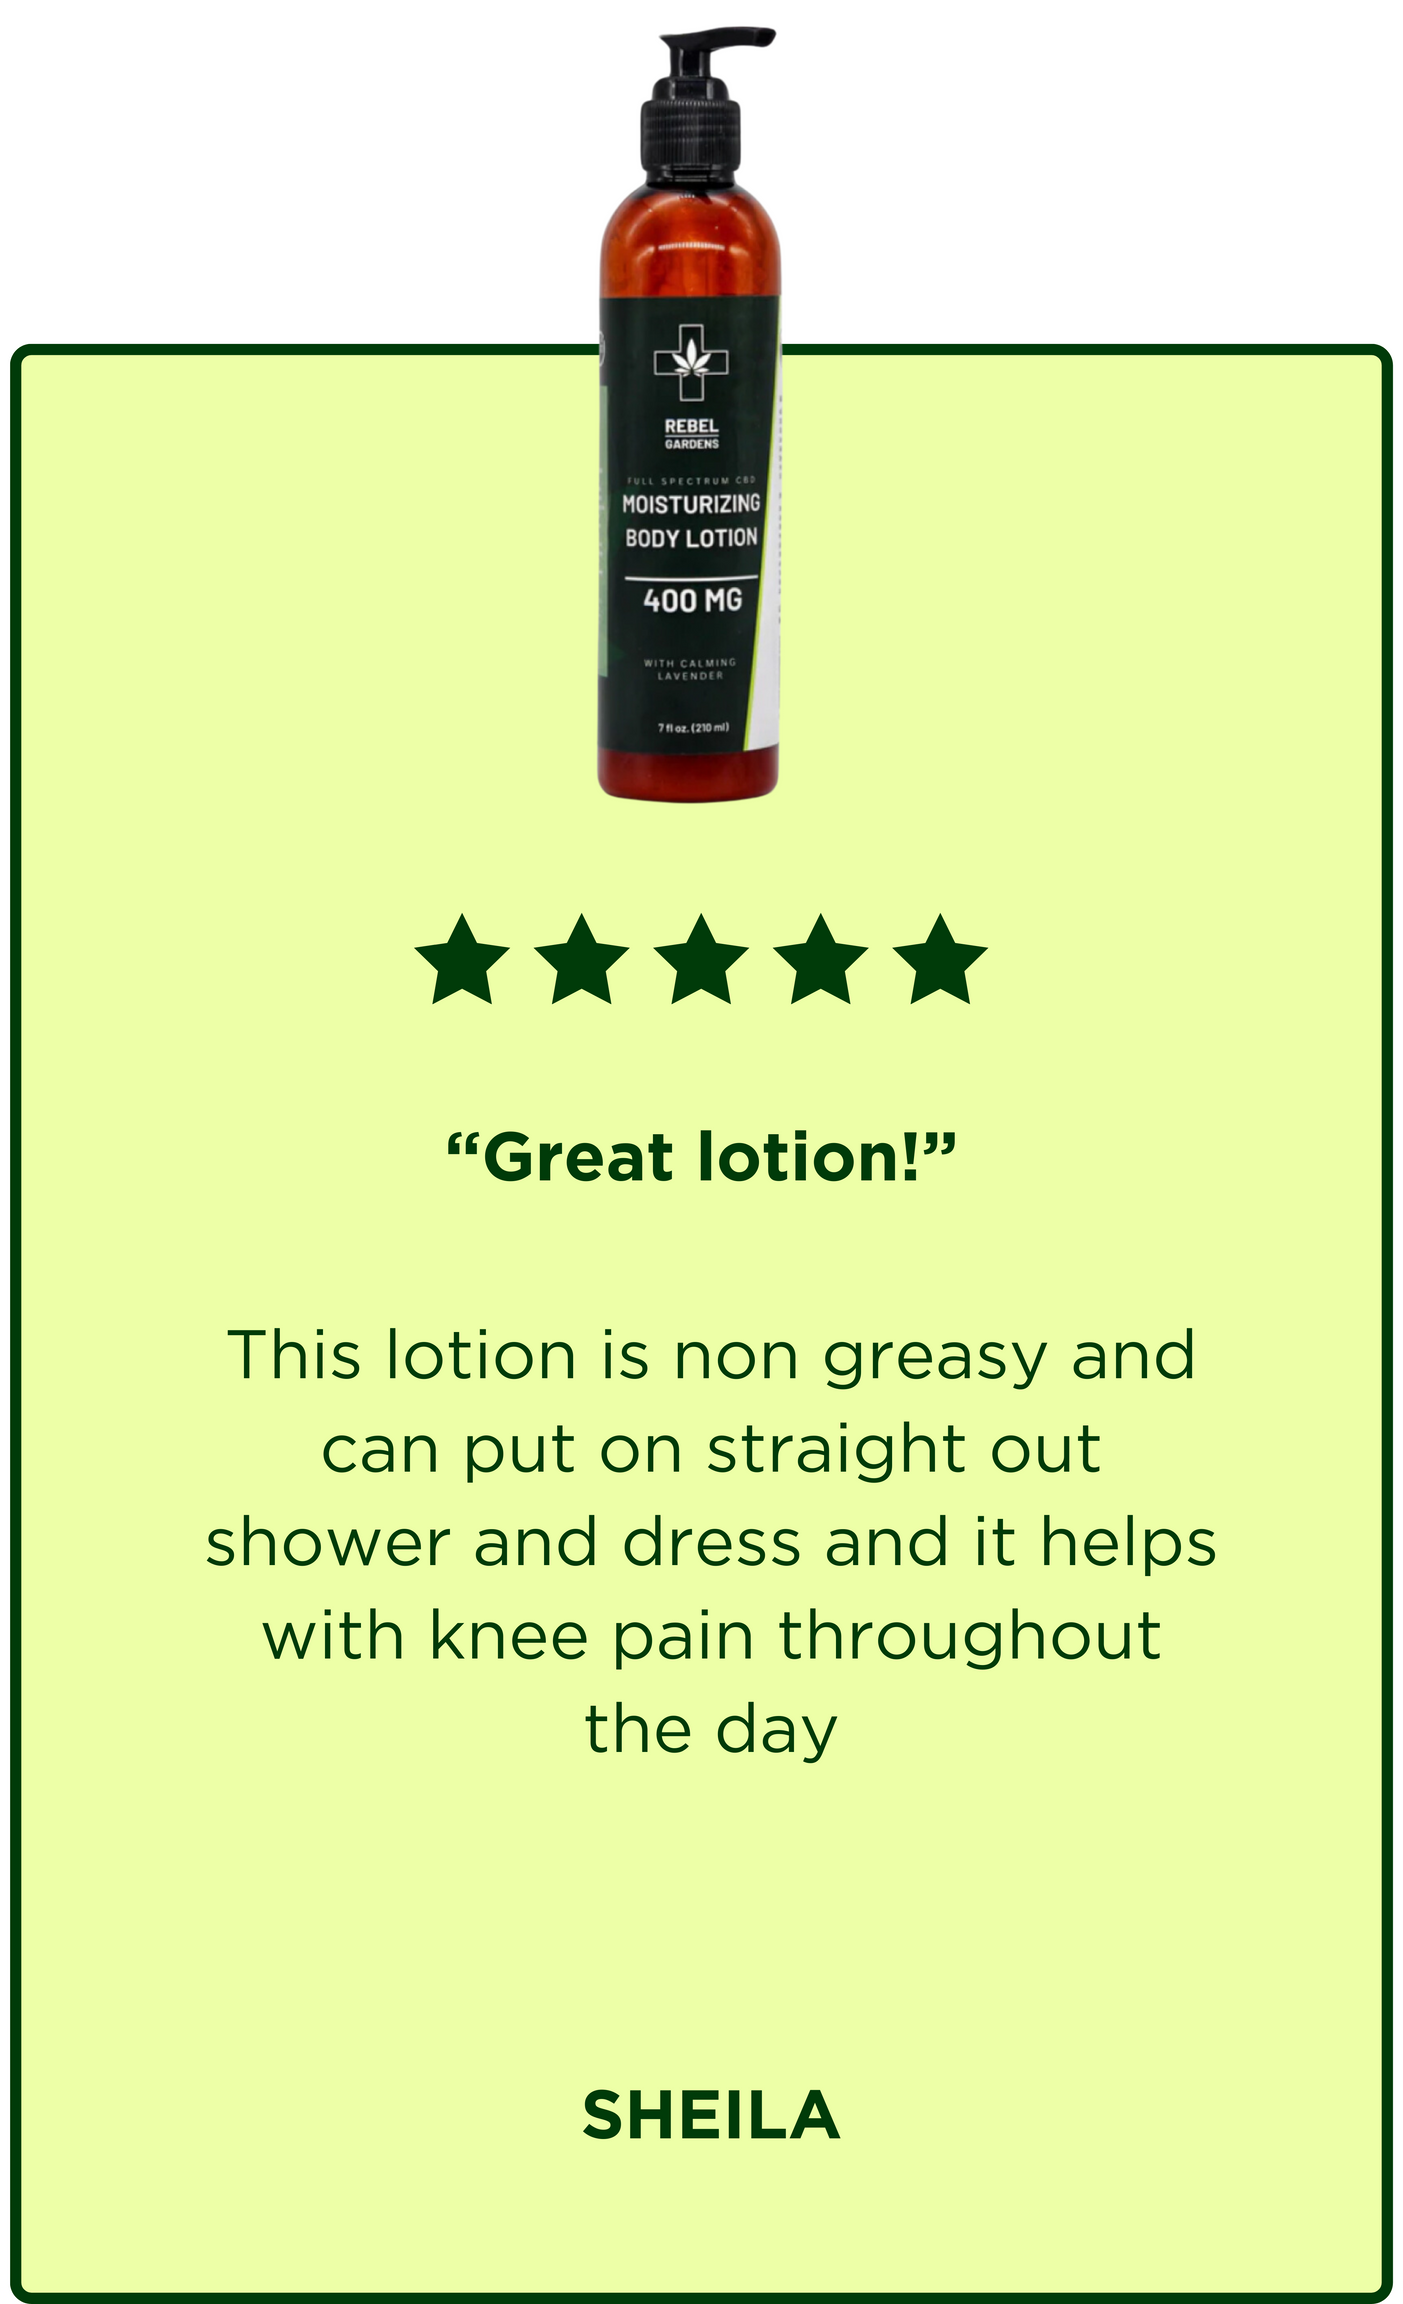 Lotion Testimonial - This lotion is non greasy and can put on straight out shower and dress and it helps with knee pain throughout the day